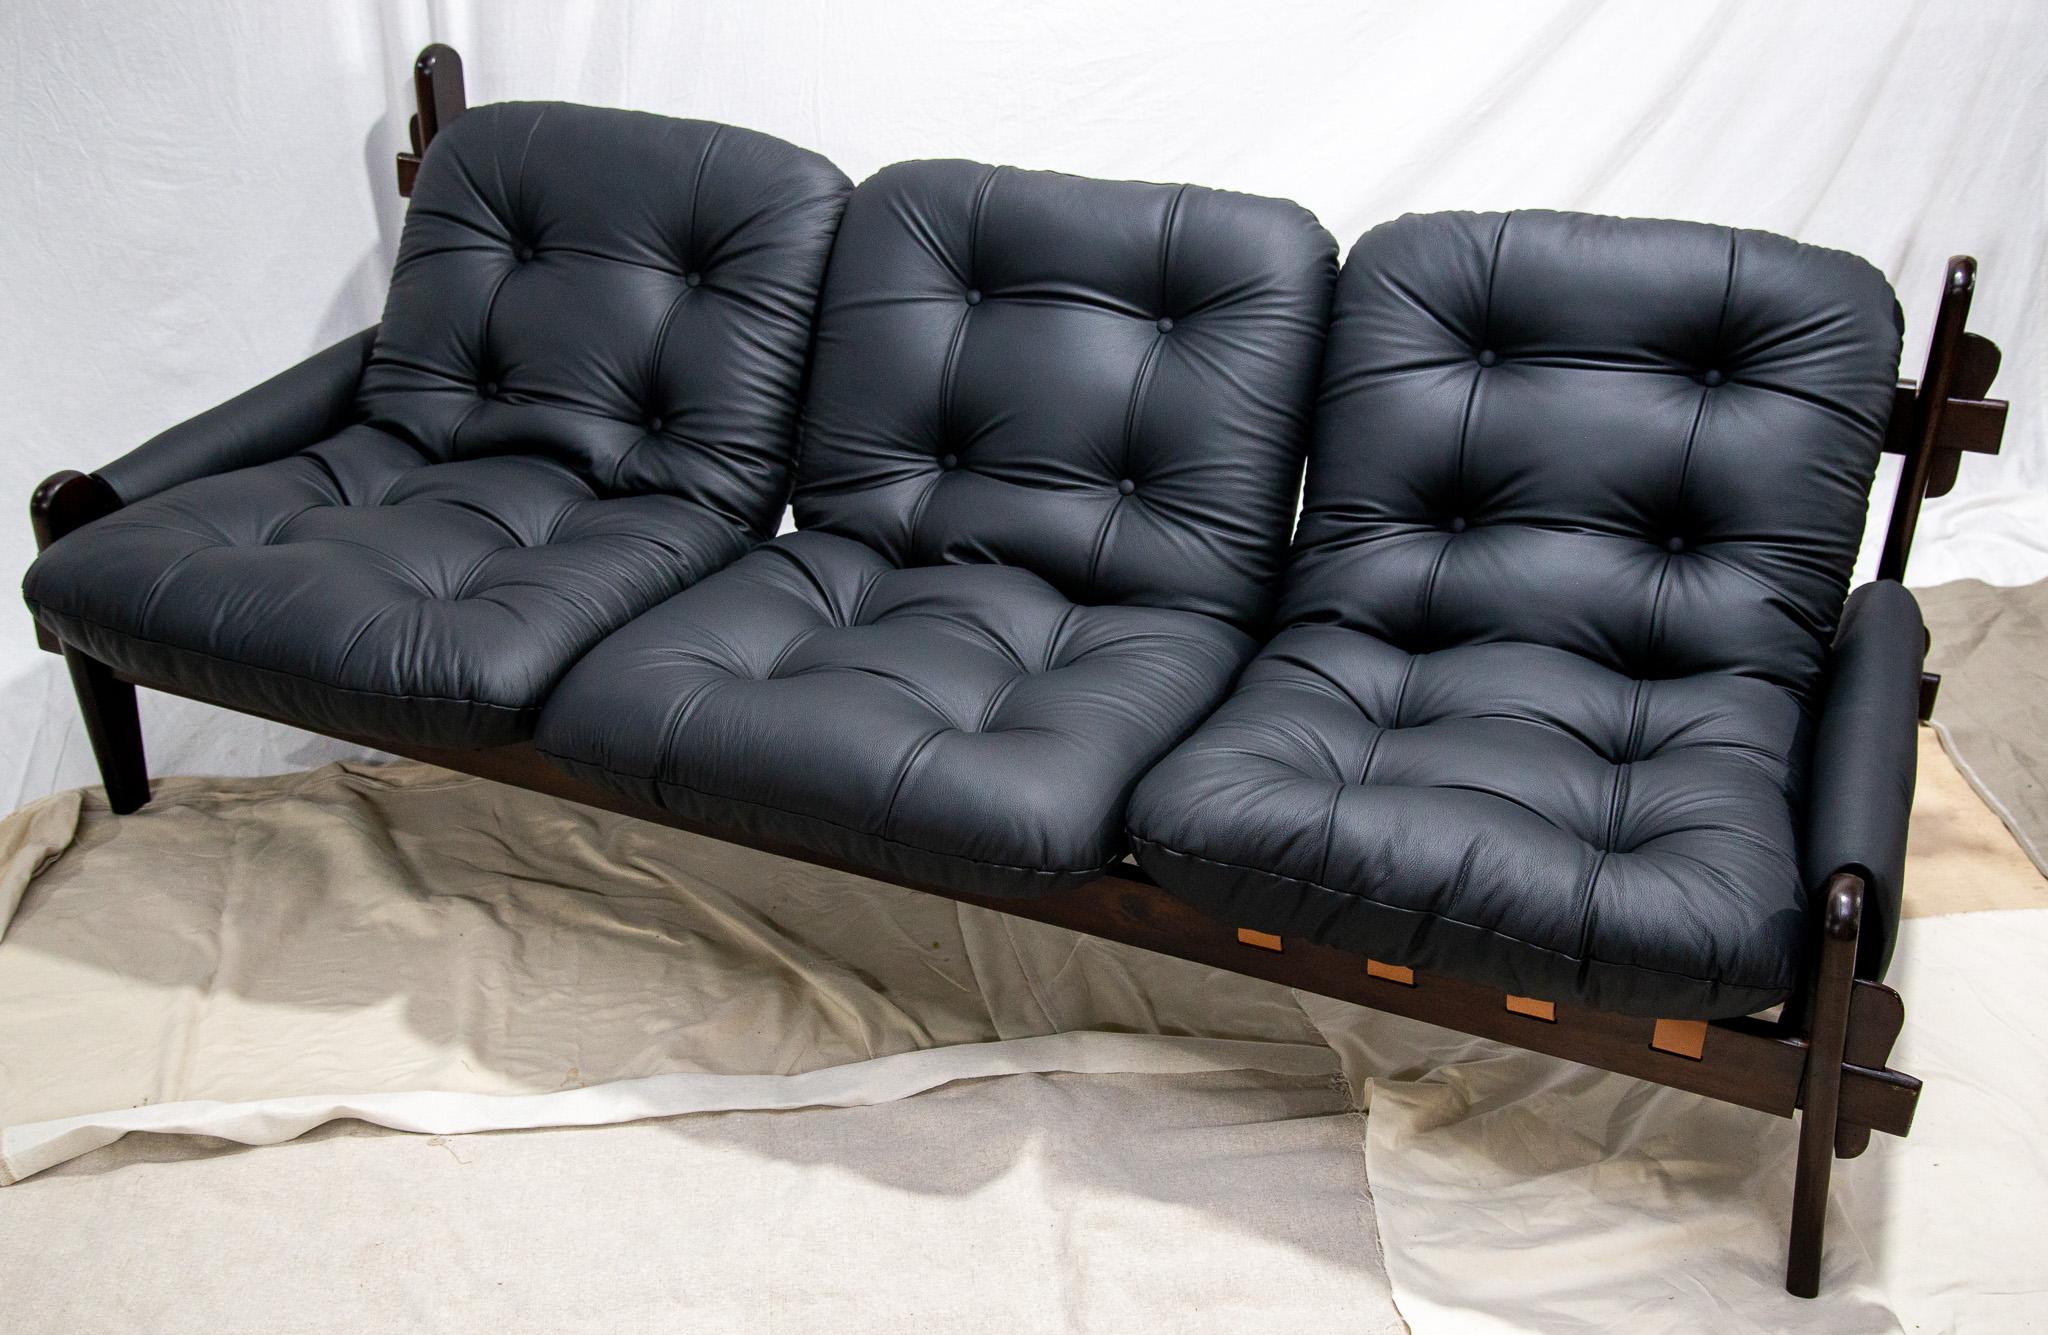 South American Mid-Century Modern Sofa in Hardwood & Leather by Jean Gillon, 1970, Brazil For Sale